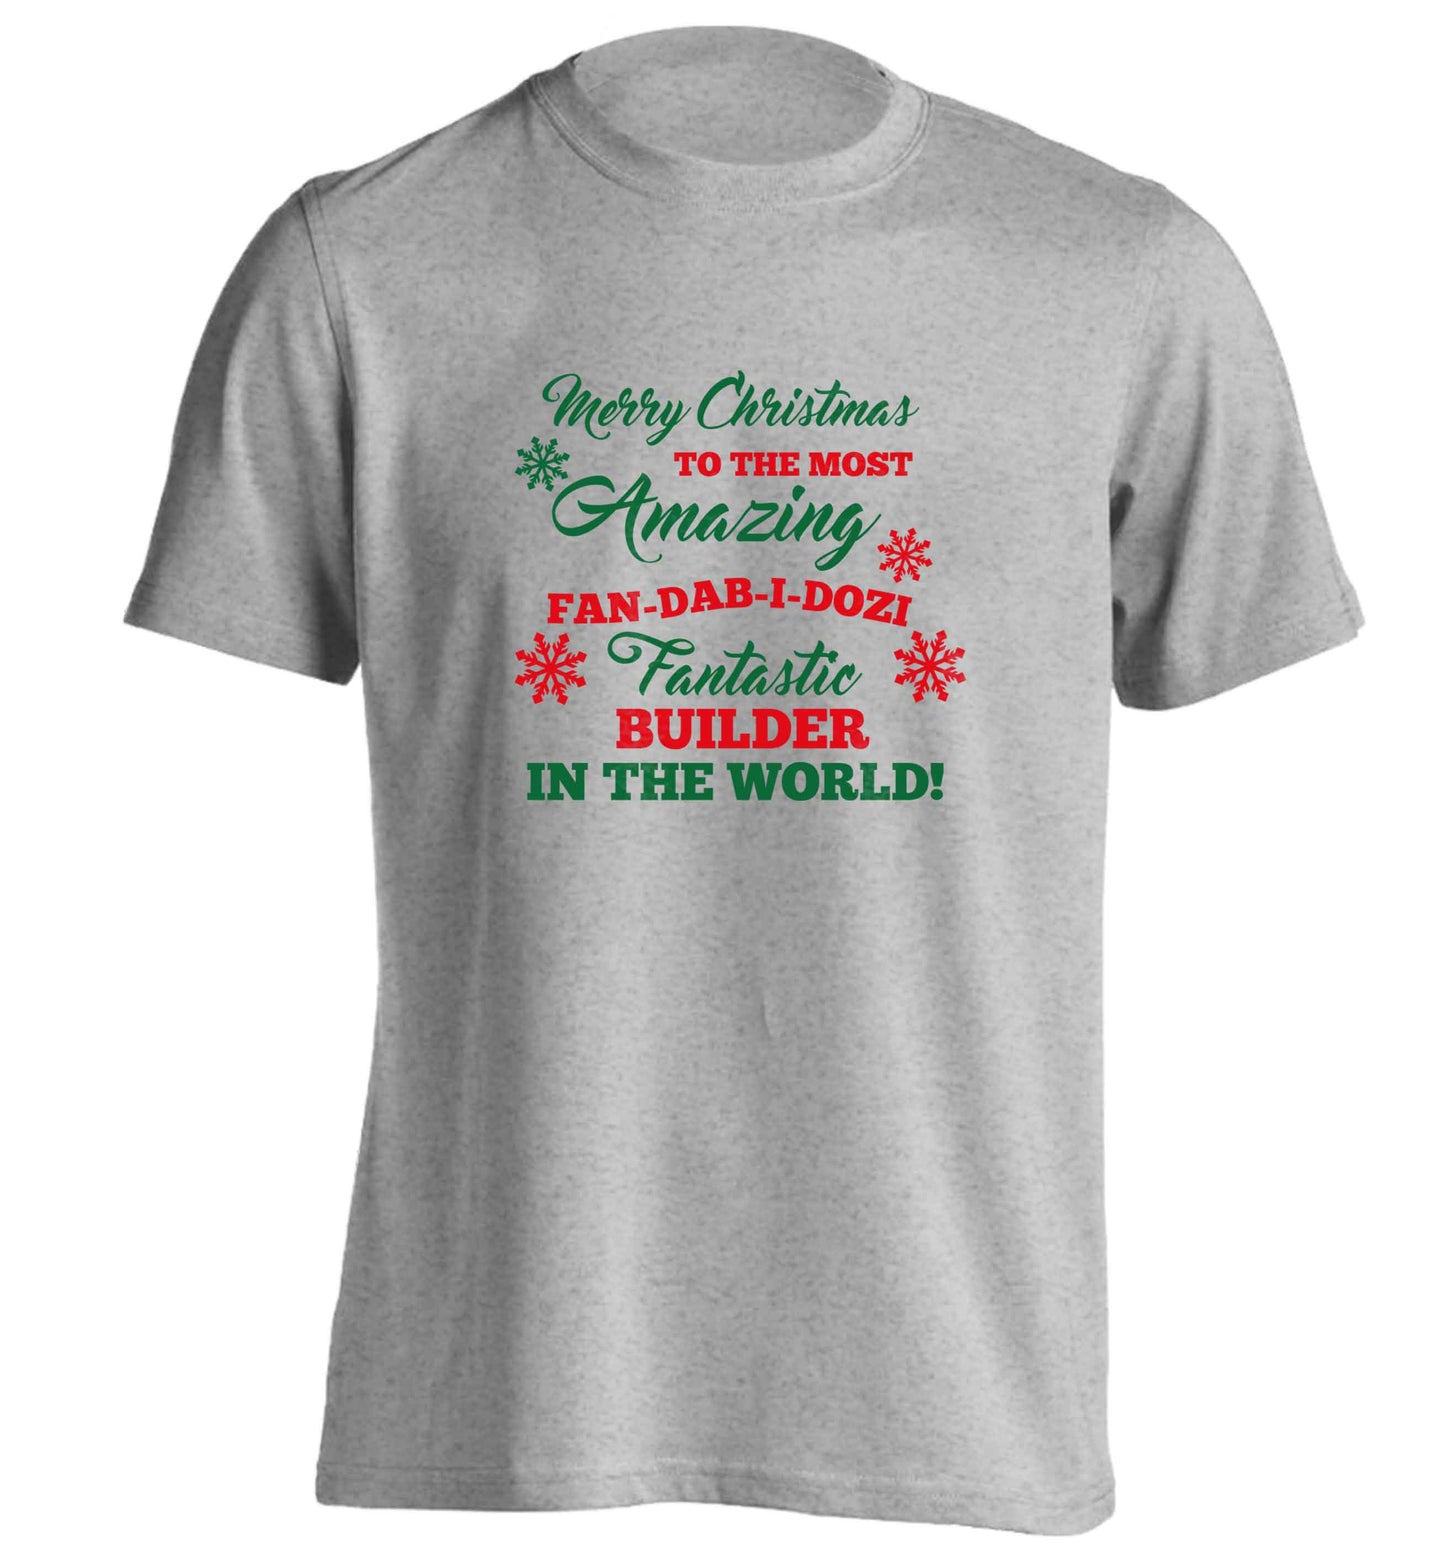 Merry Christmas to the most amazing builder in the world! adults unisex grey Tshirt 2XL